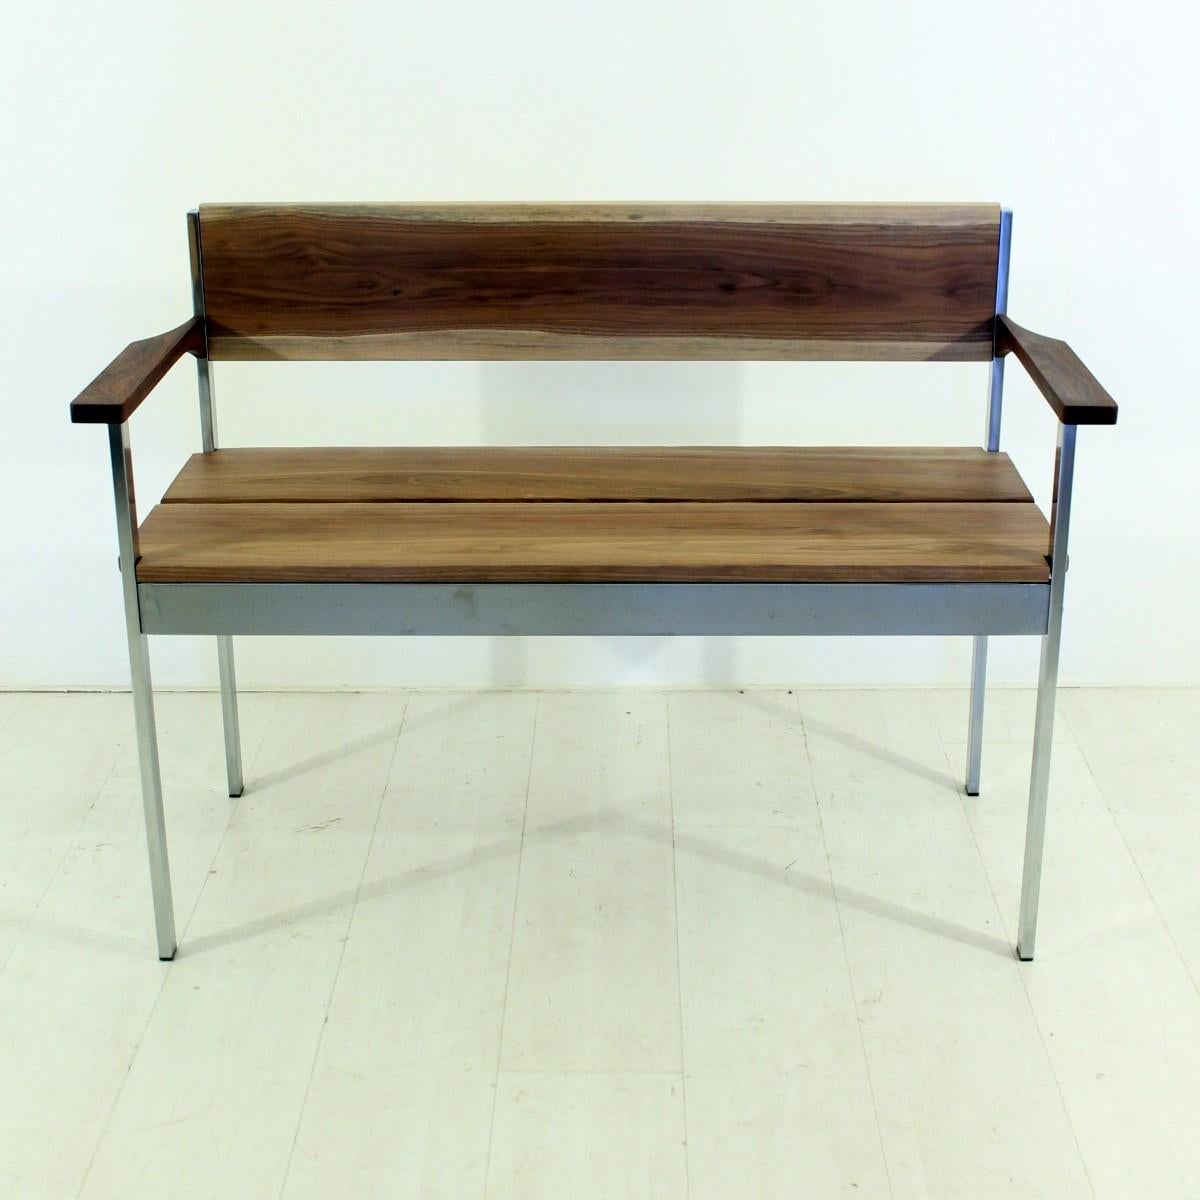 - Vintage bench in solid walnut
- Features armrests dark teak
- Honed and oiled
- Non-toxic wood worm treatment.